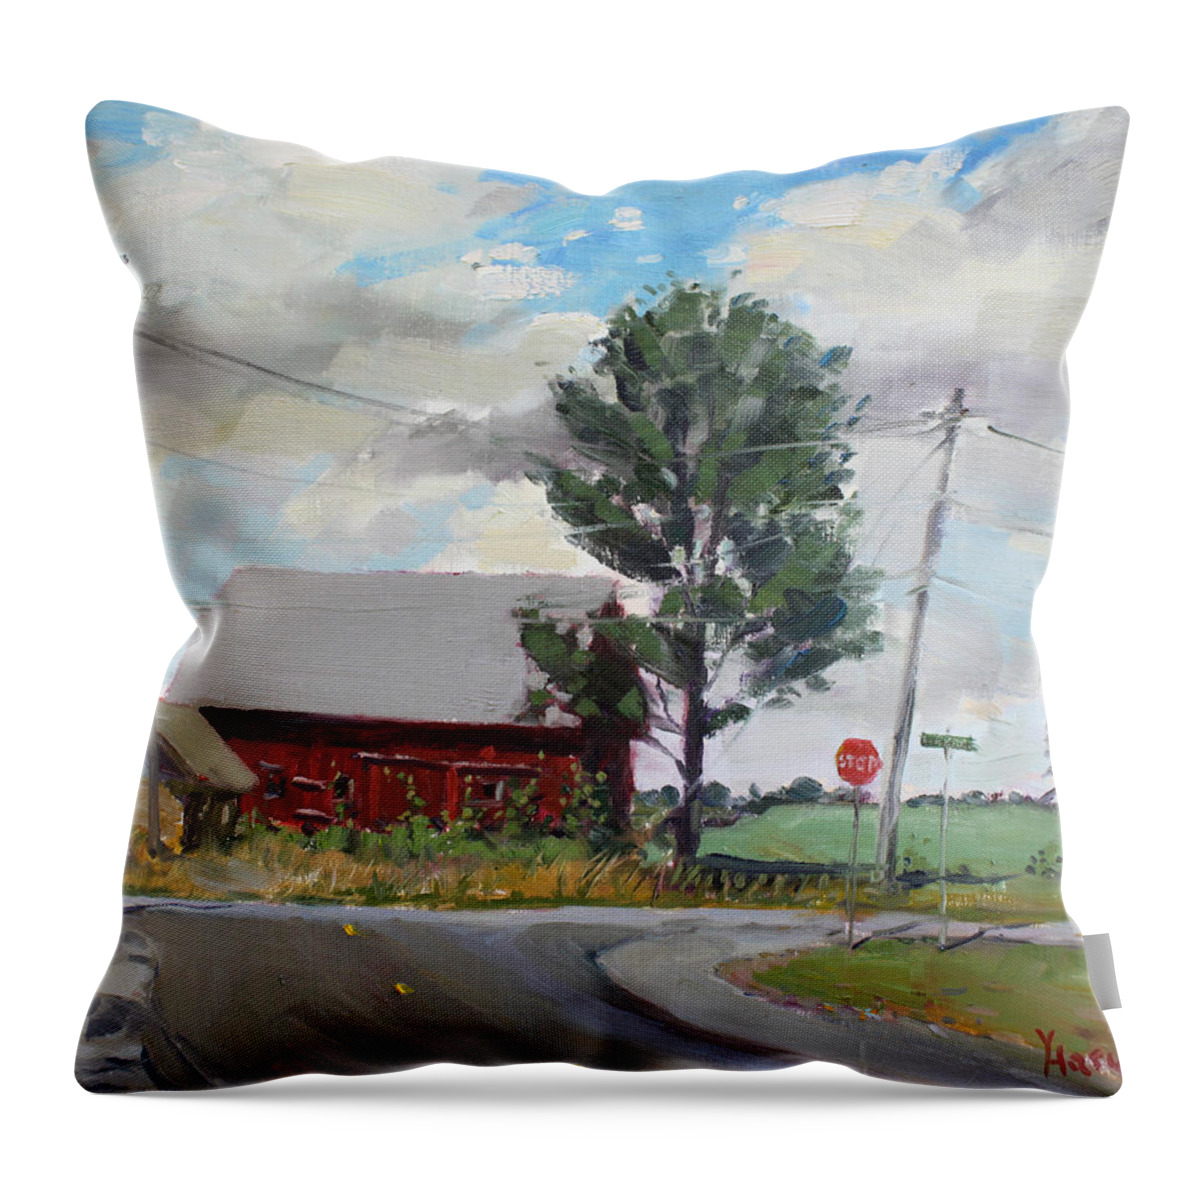 Barn Throw Pillow featuring the painting Barn by Lockport Rd by Ylli Haruni